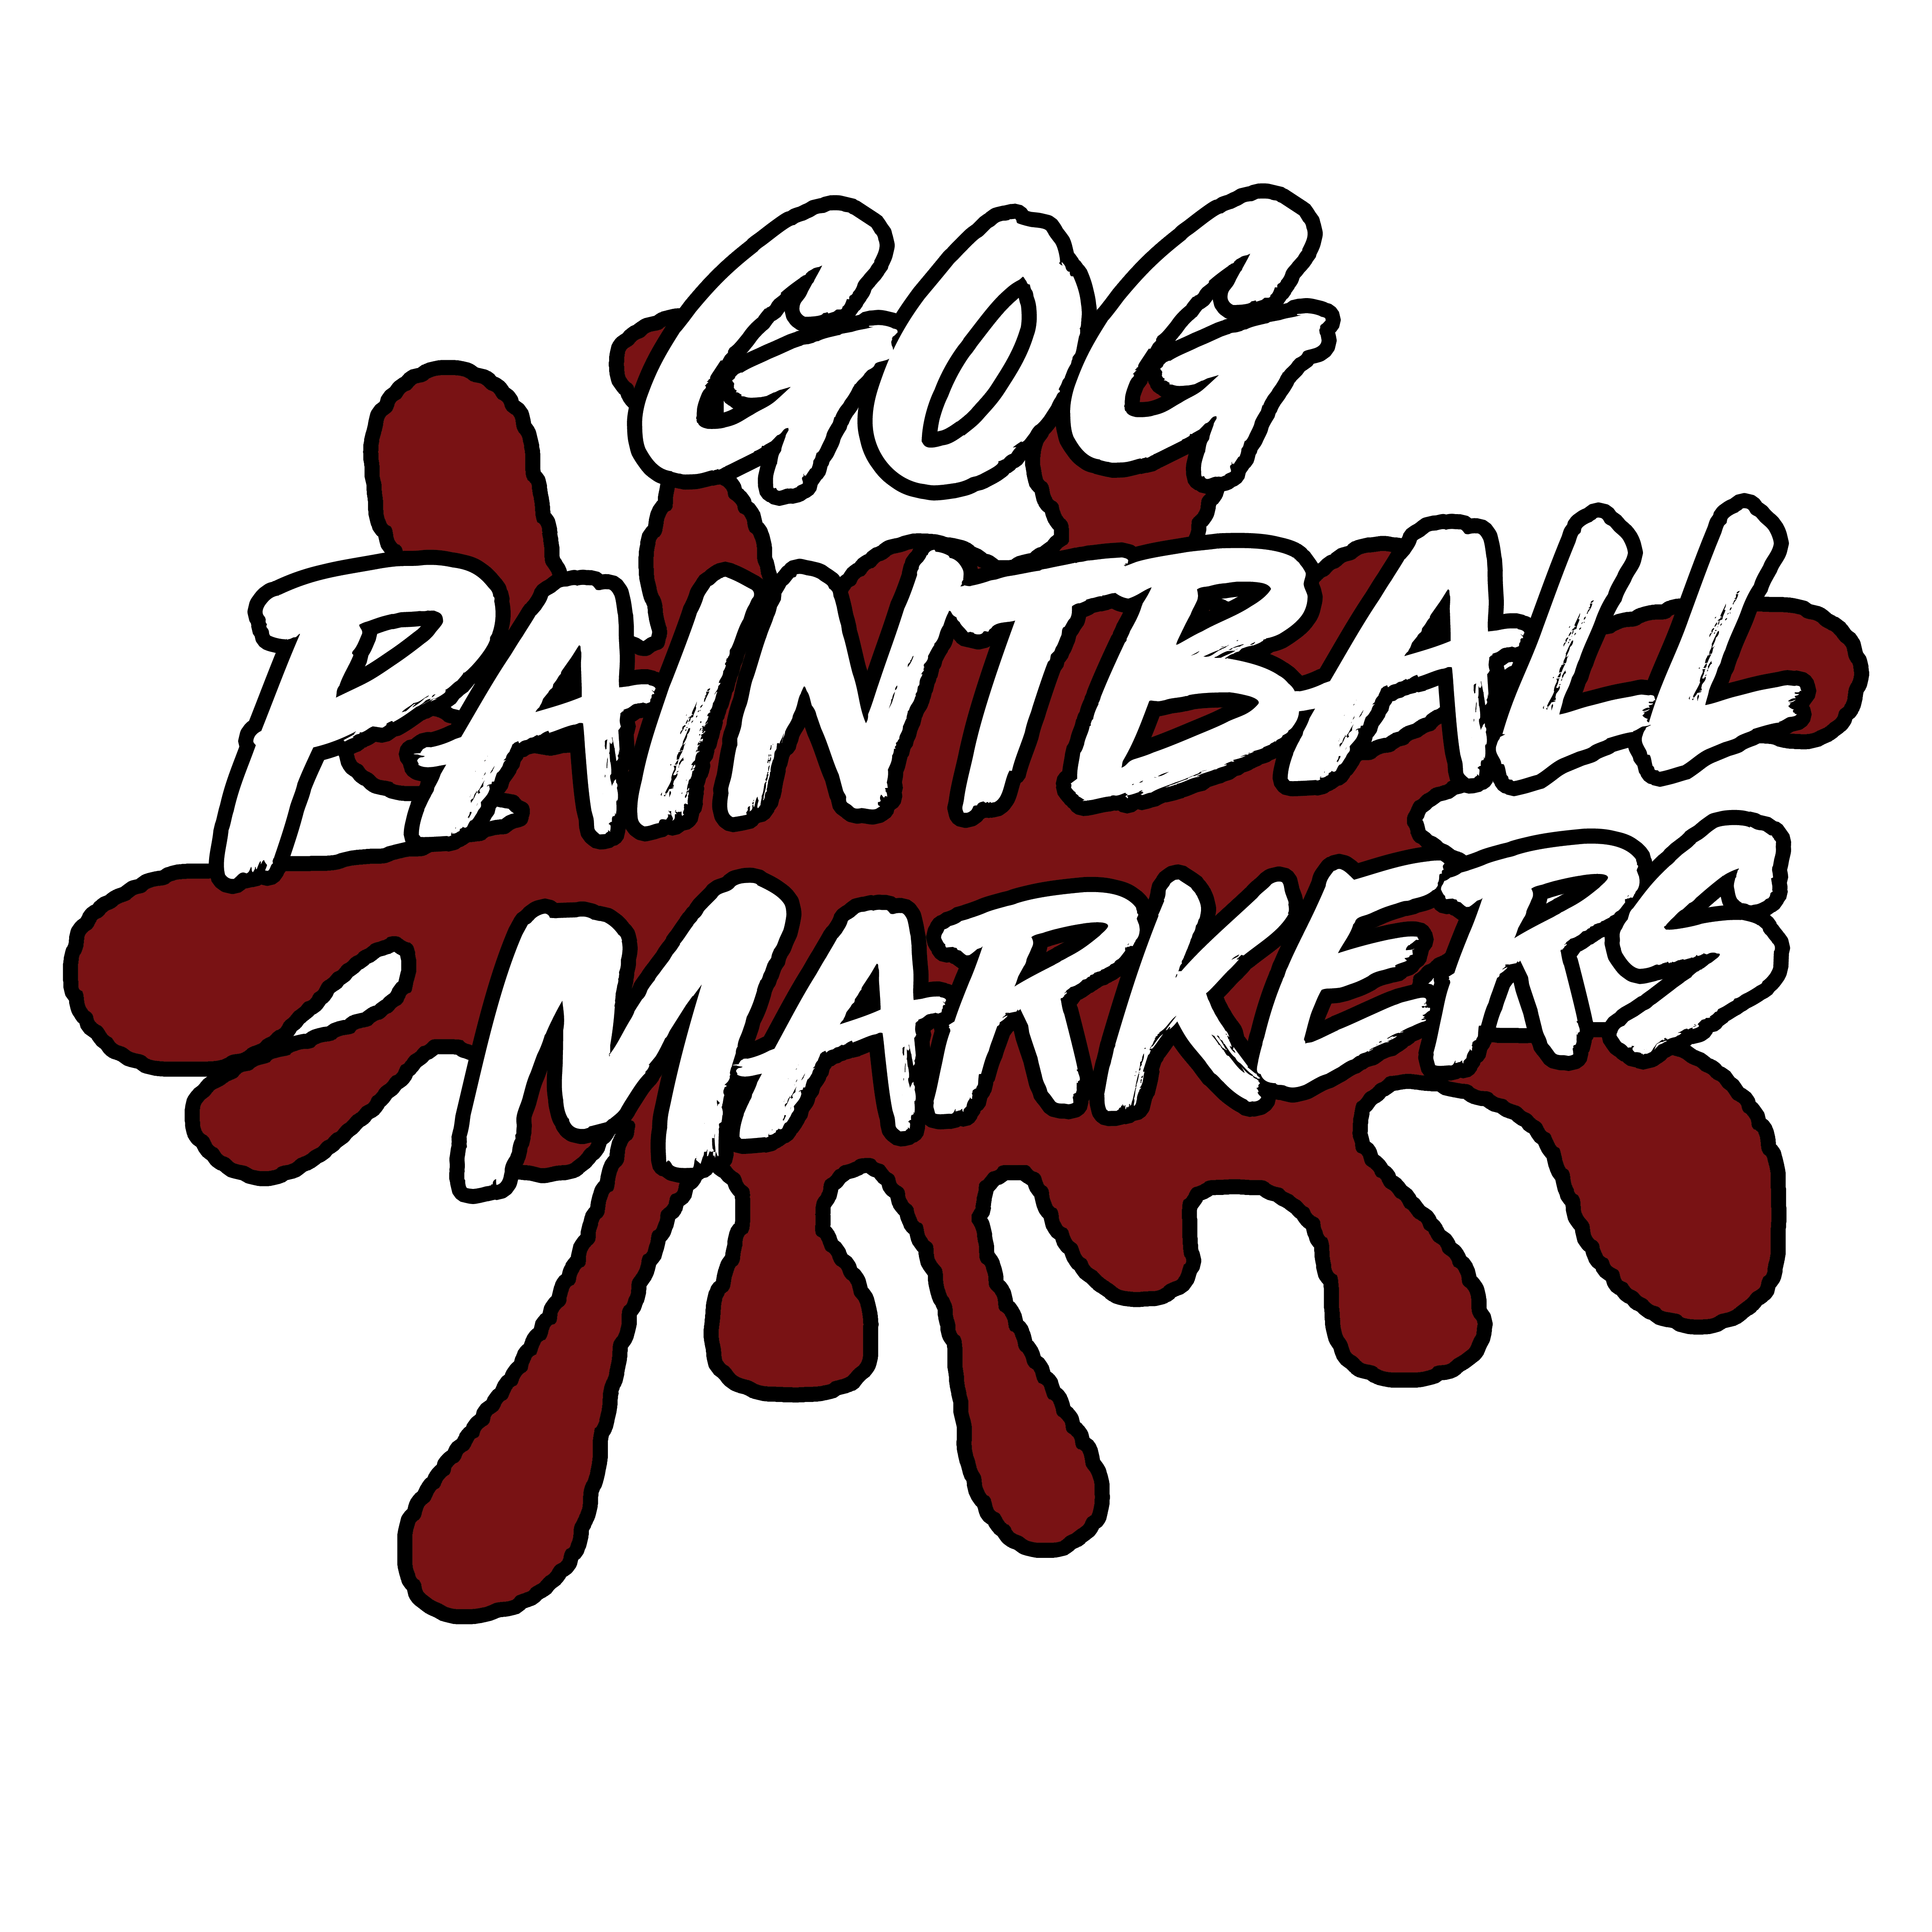 GOG Paintball Markers